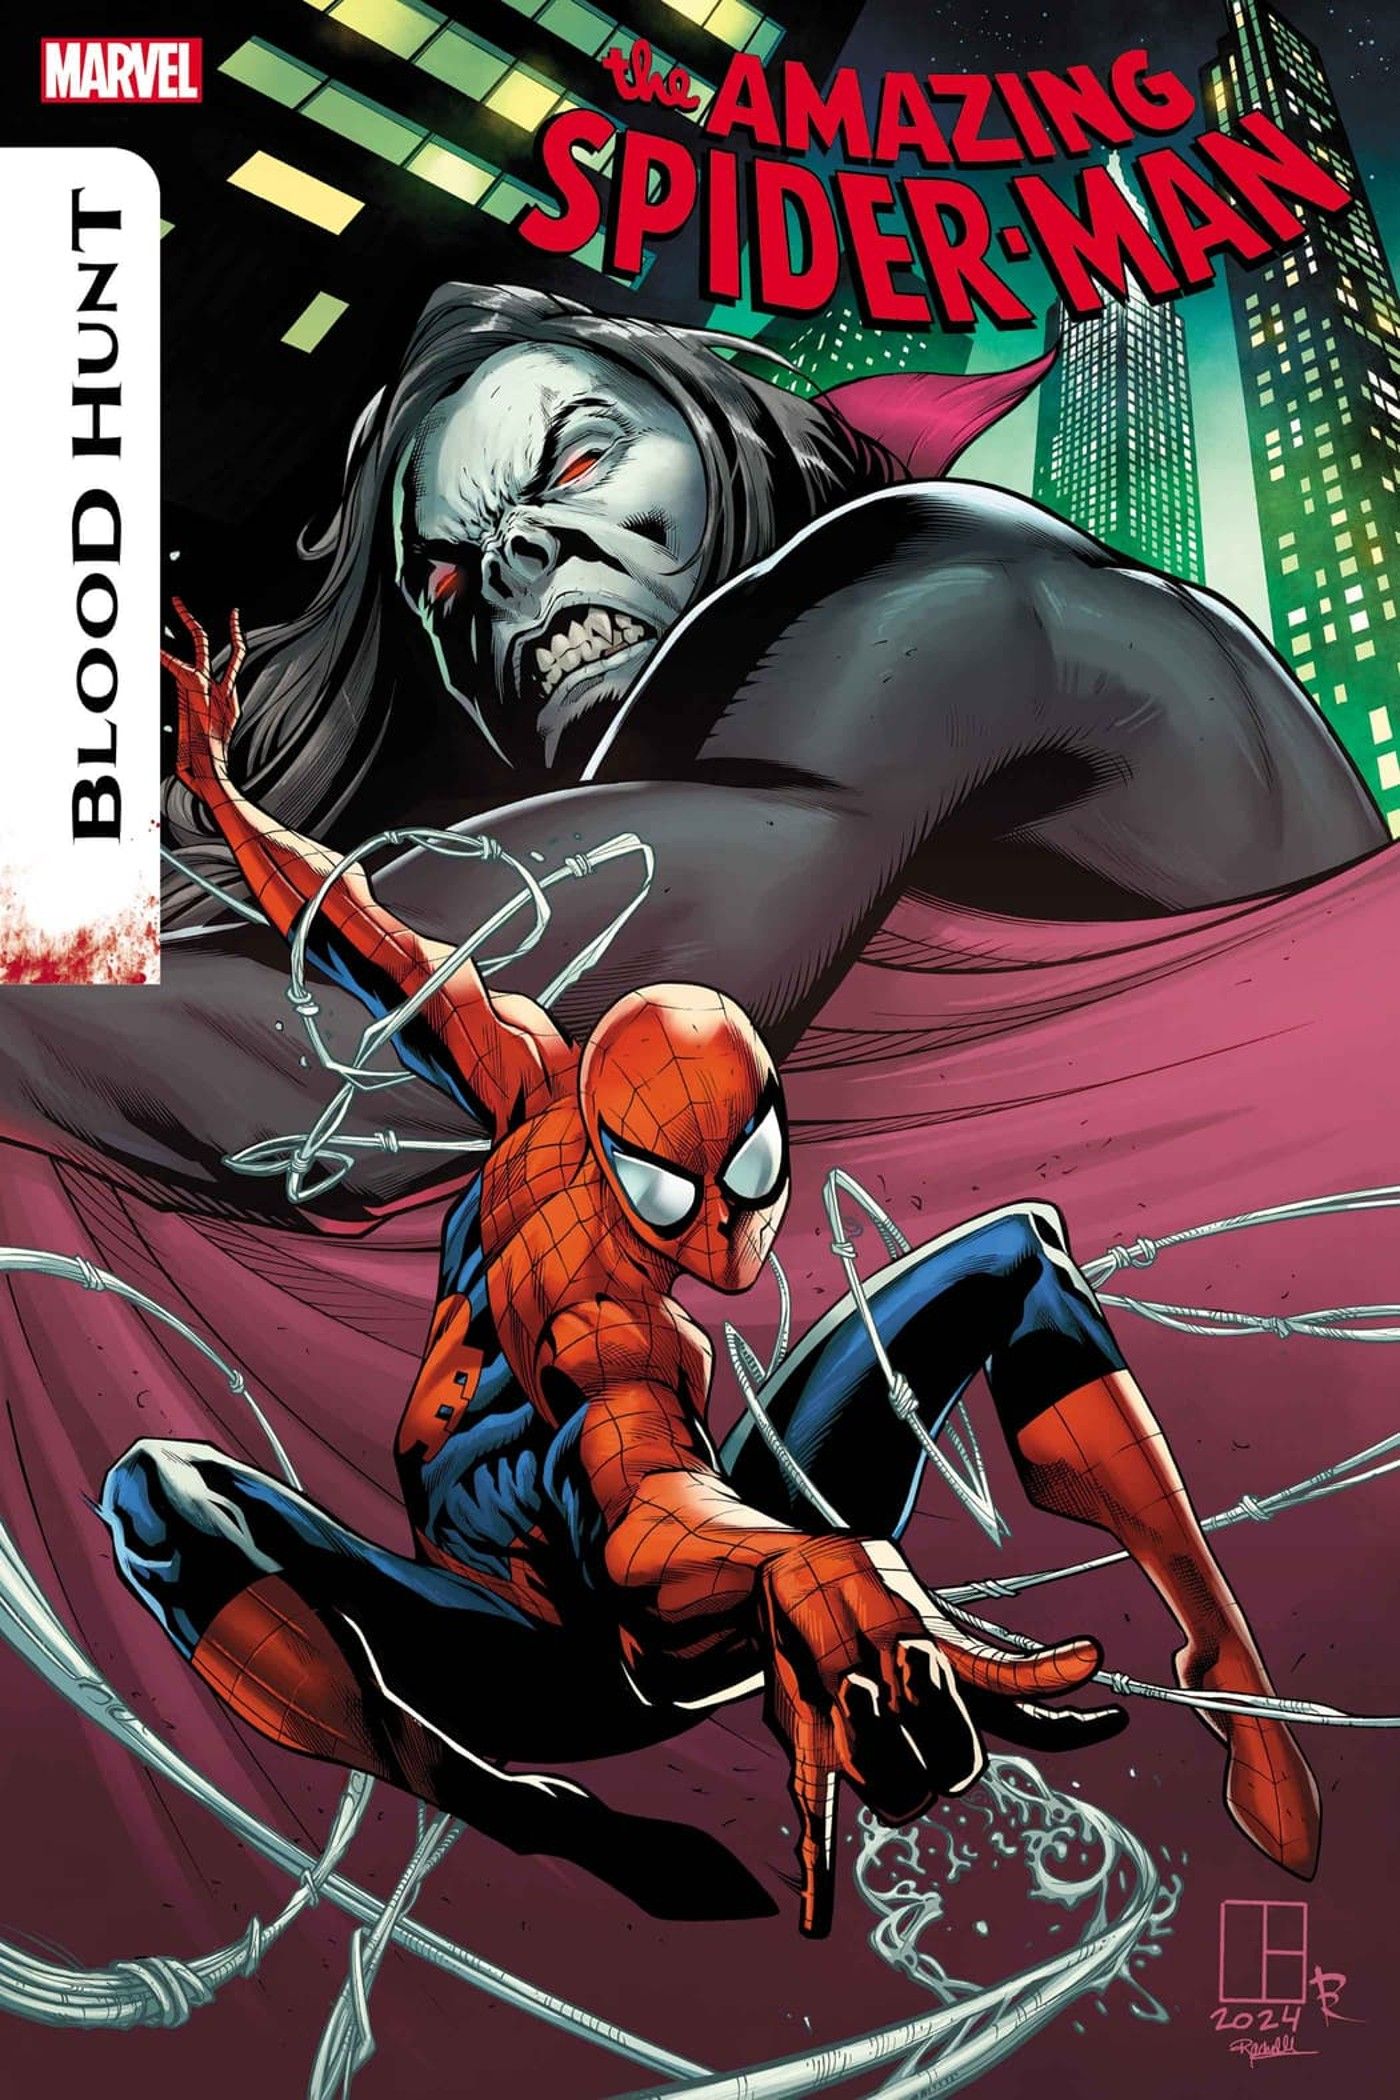 Image of Spider-Man and Morbius